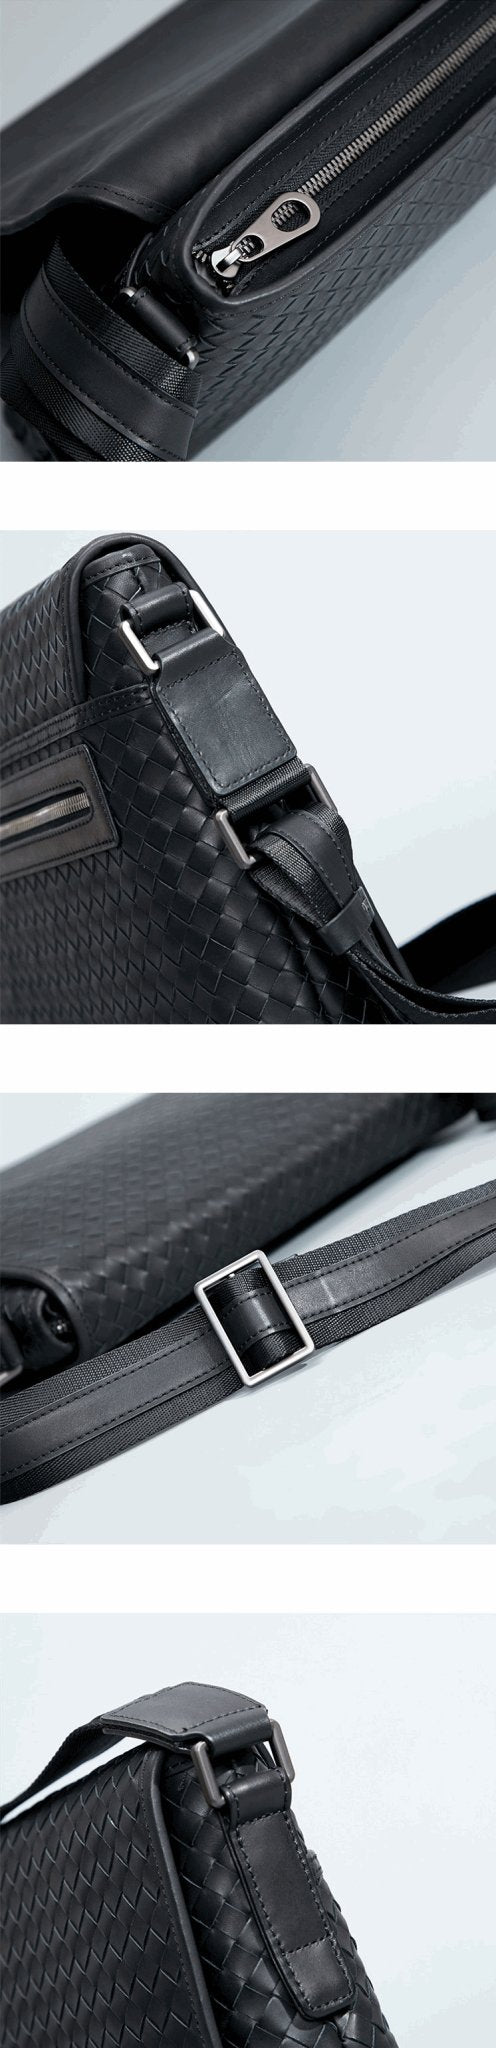 Men's Luxury Business Casual Leather Woven Messenger Bag - Classic Leather Bag